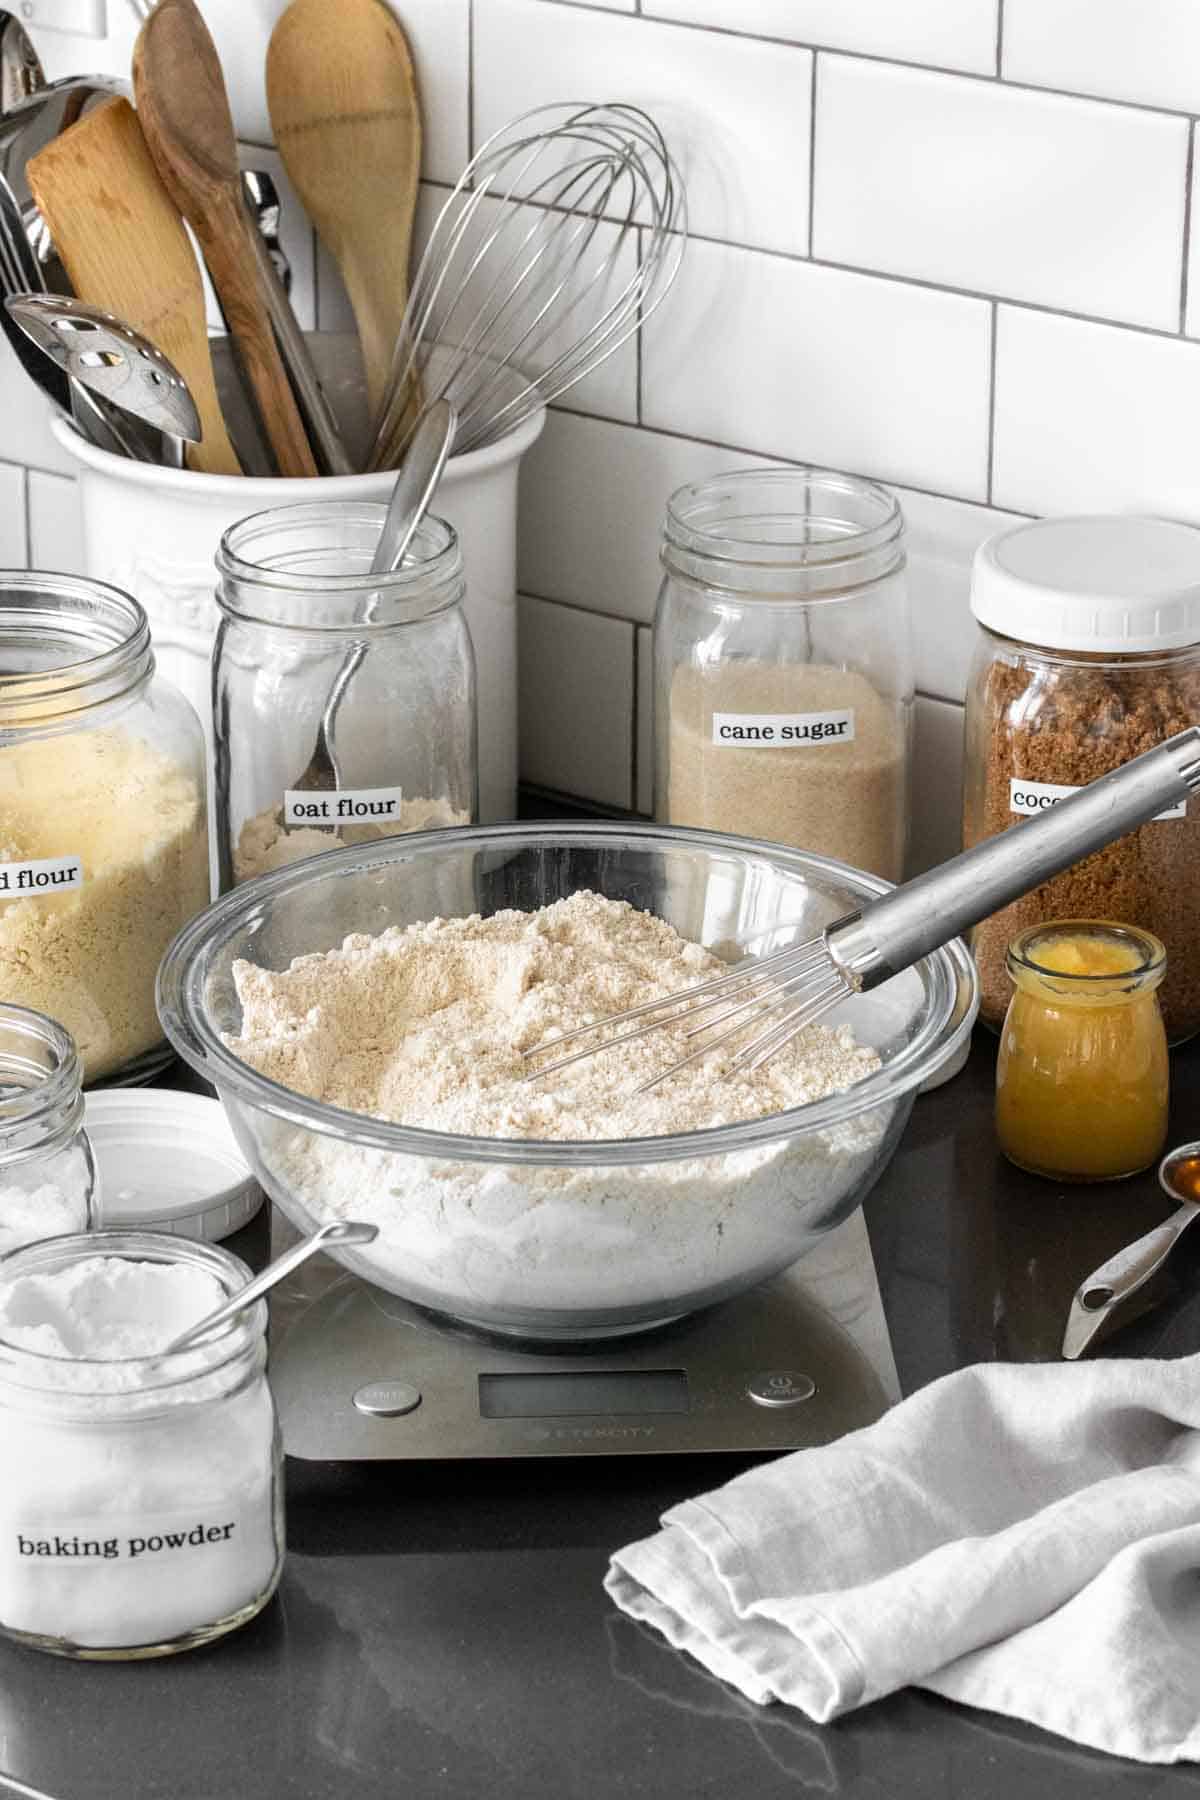 A glass bowl with flour and a whisk sitting on a kitchen scale surrounded by baking supplies on a countertop.